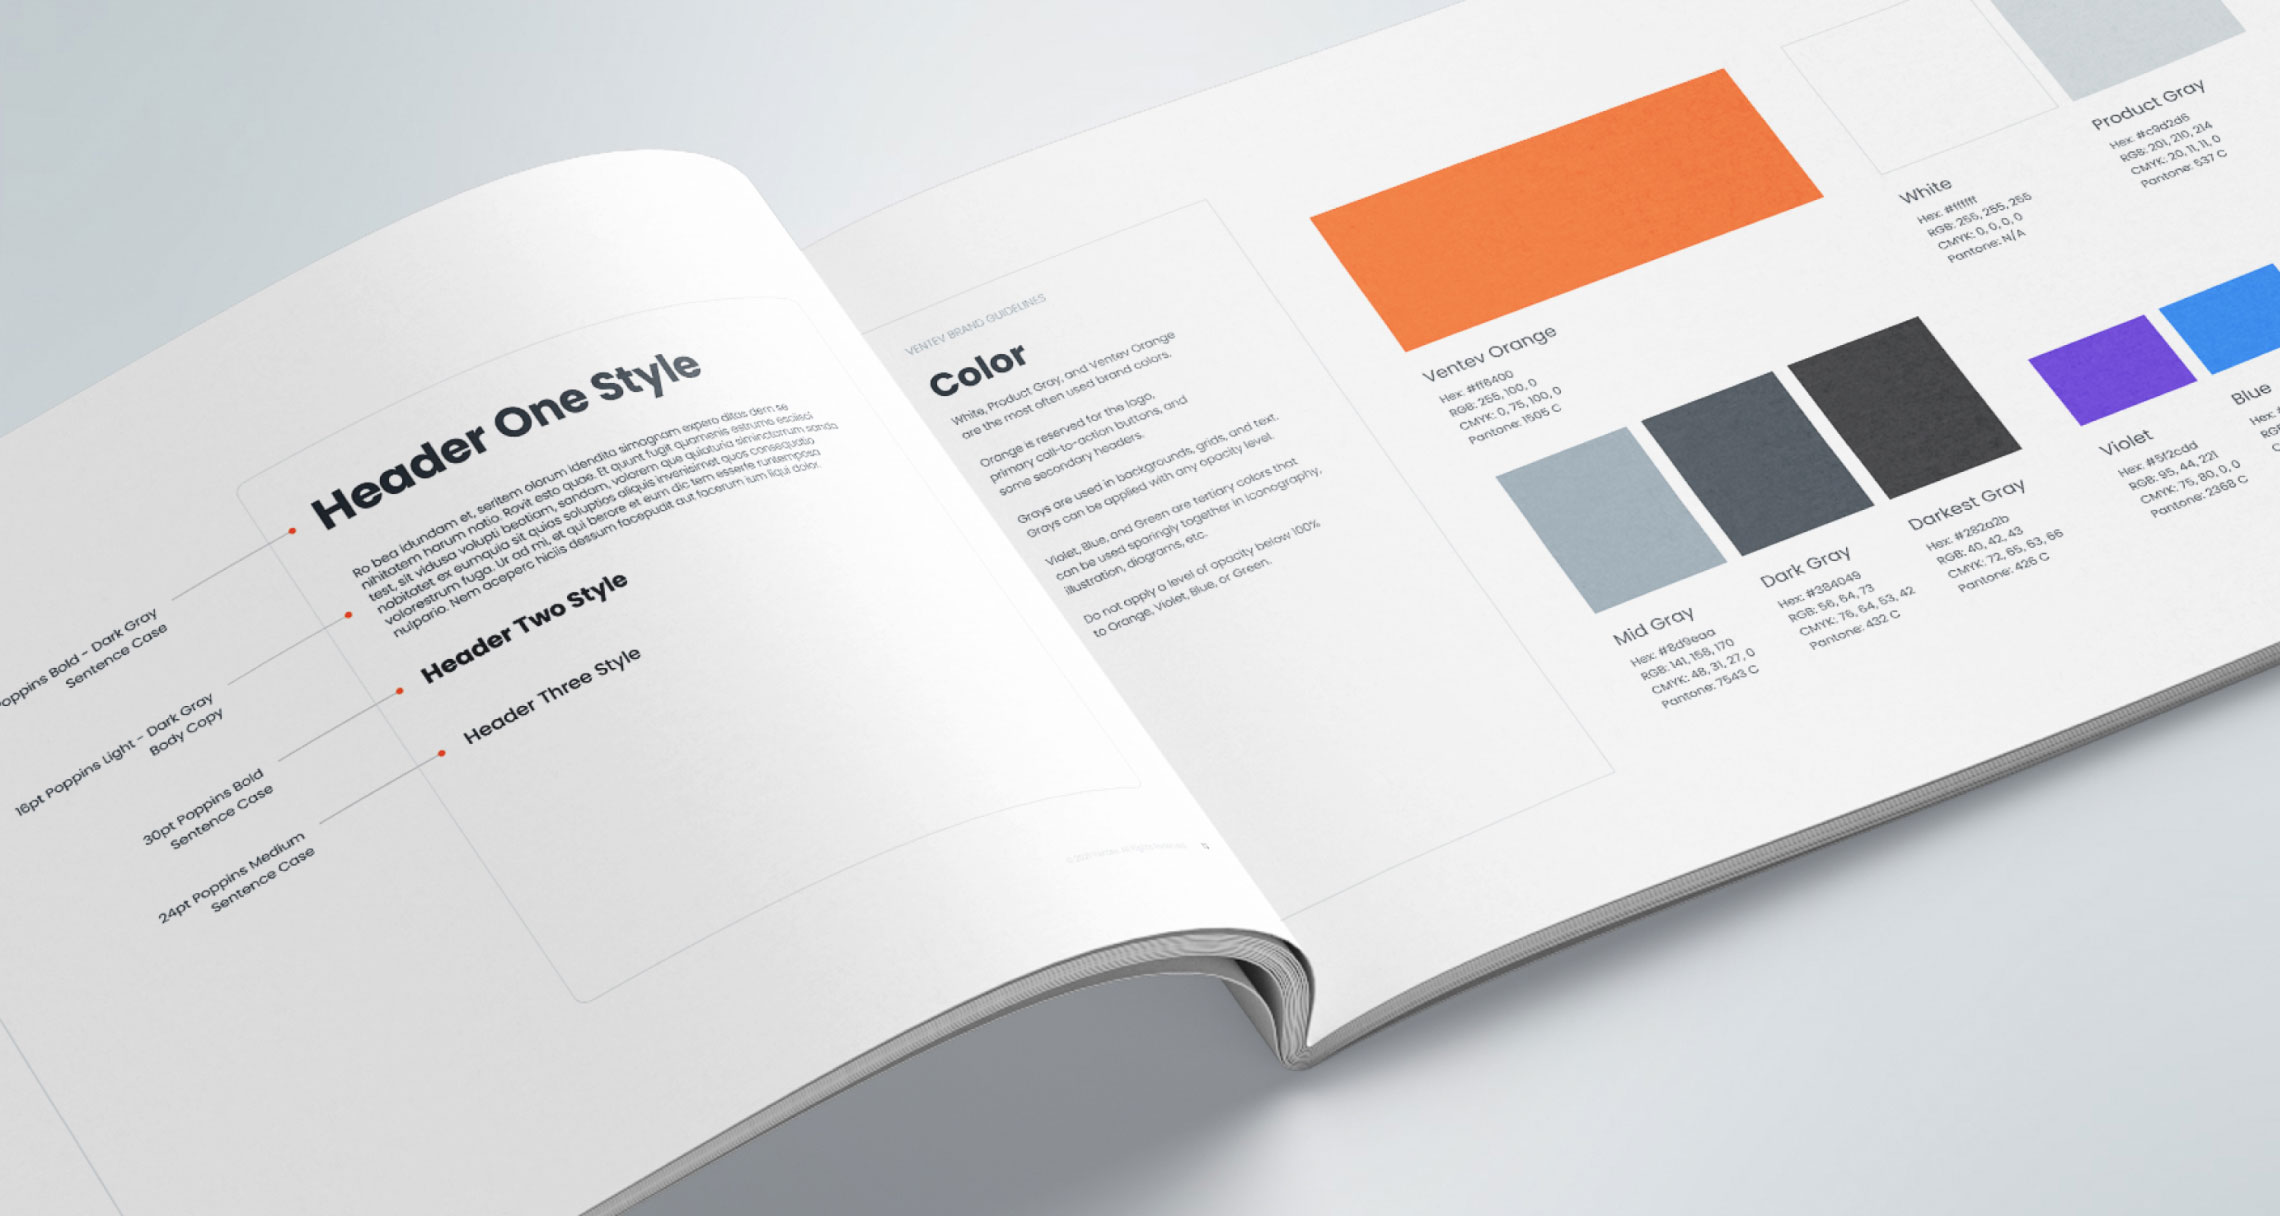 A photo of the Ventev Brand Guidelines book